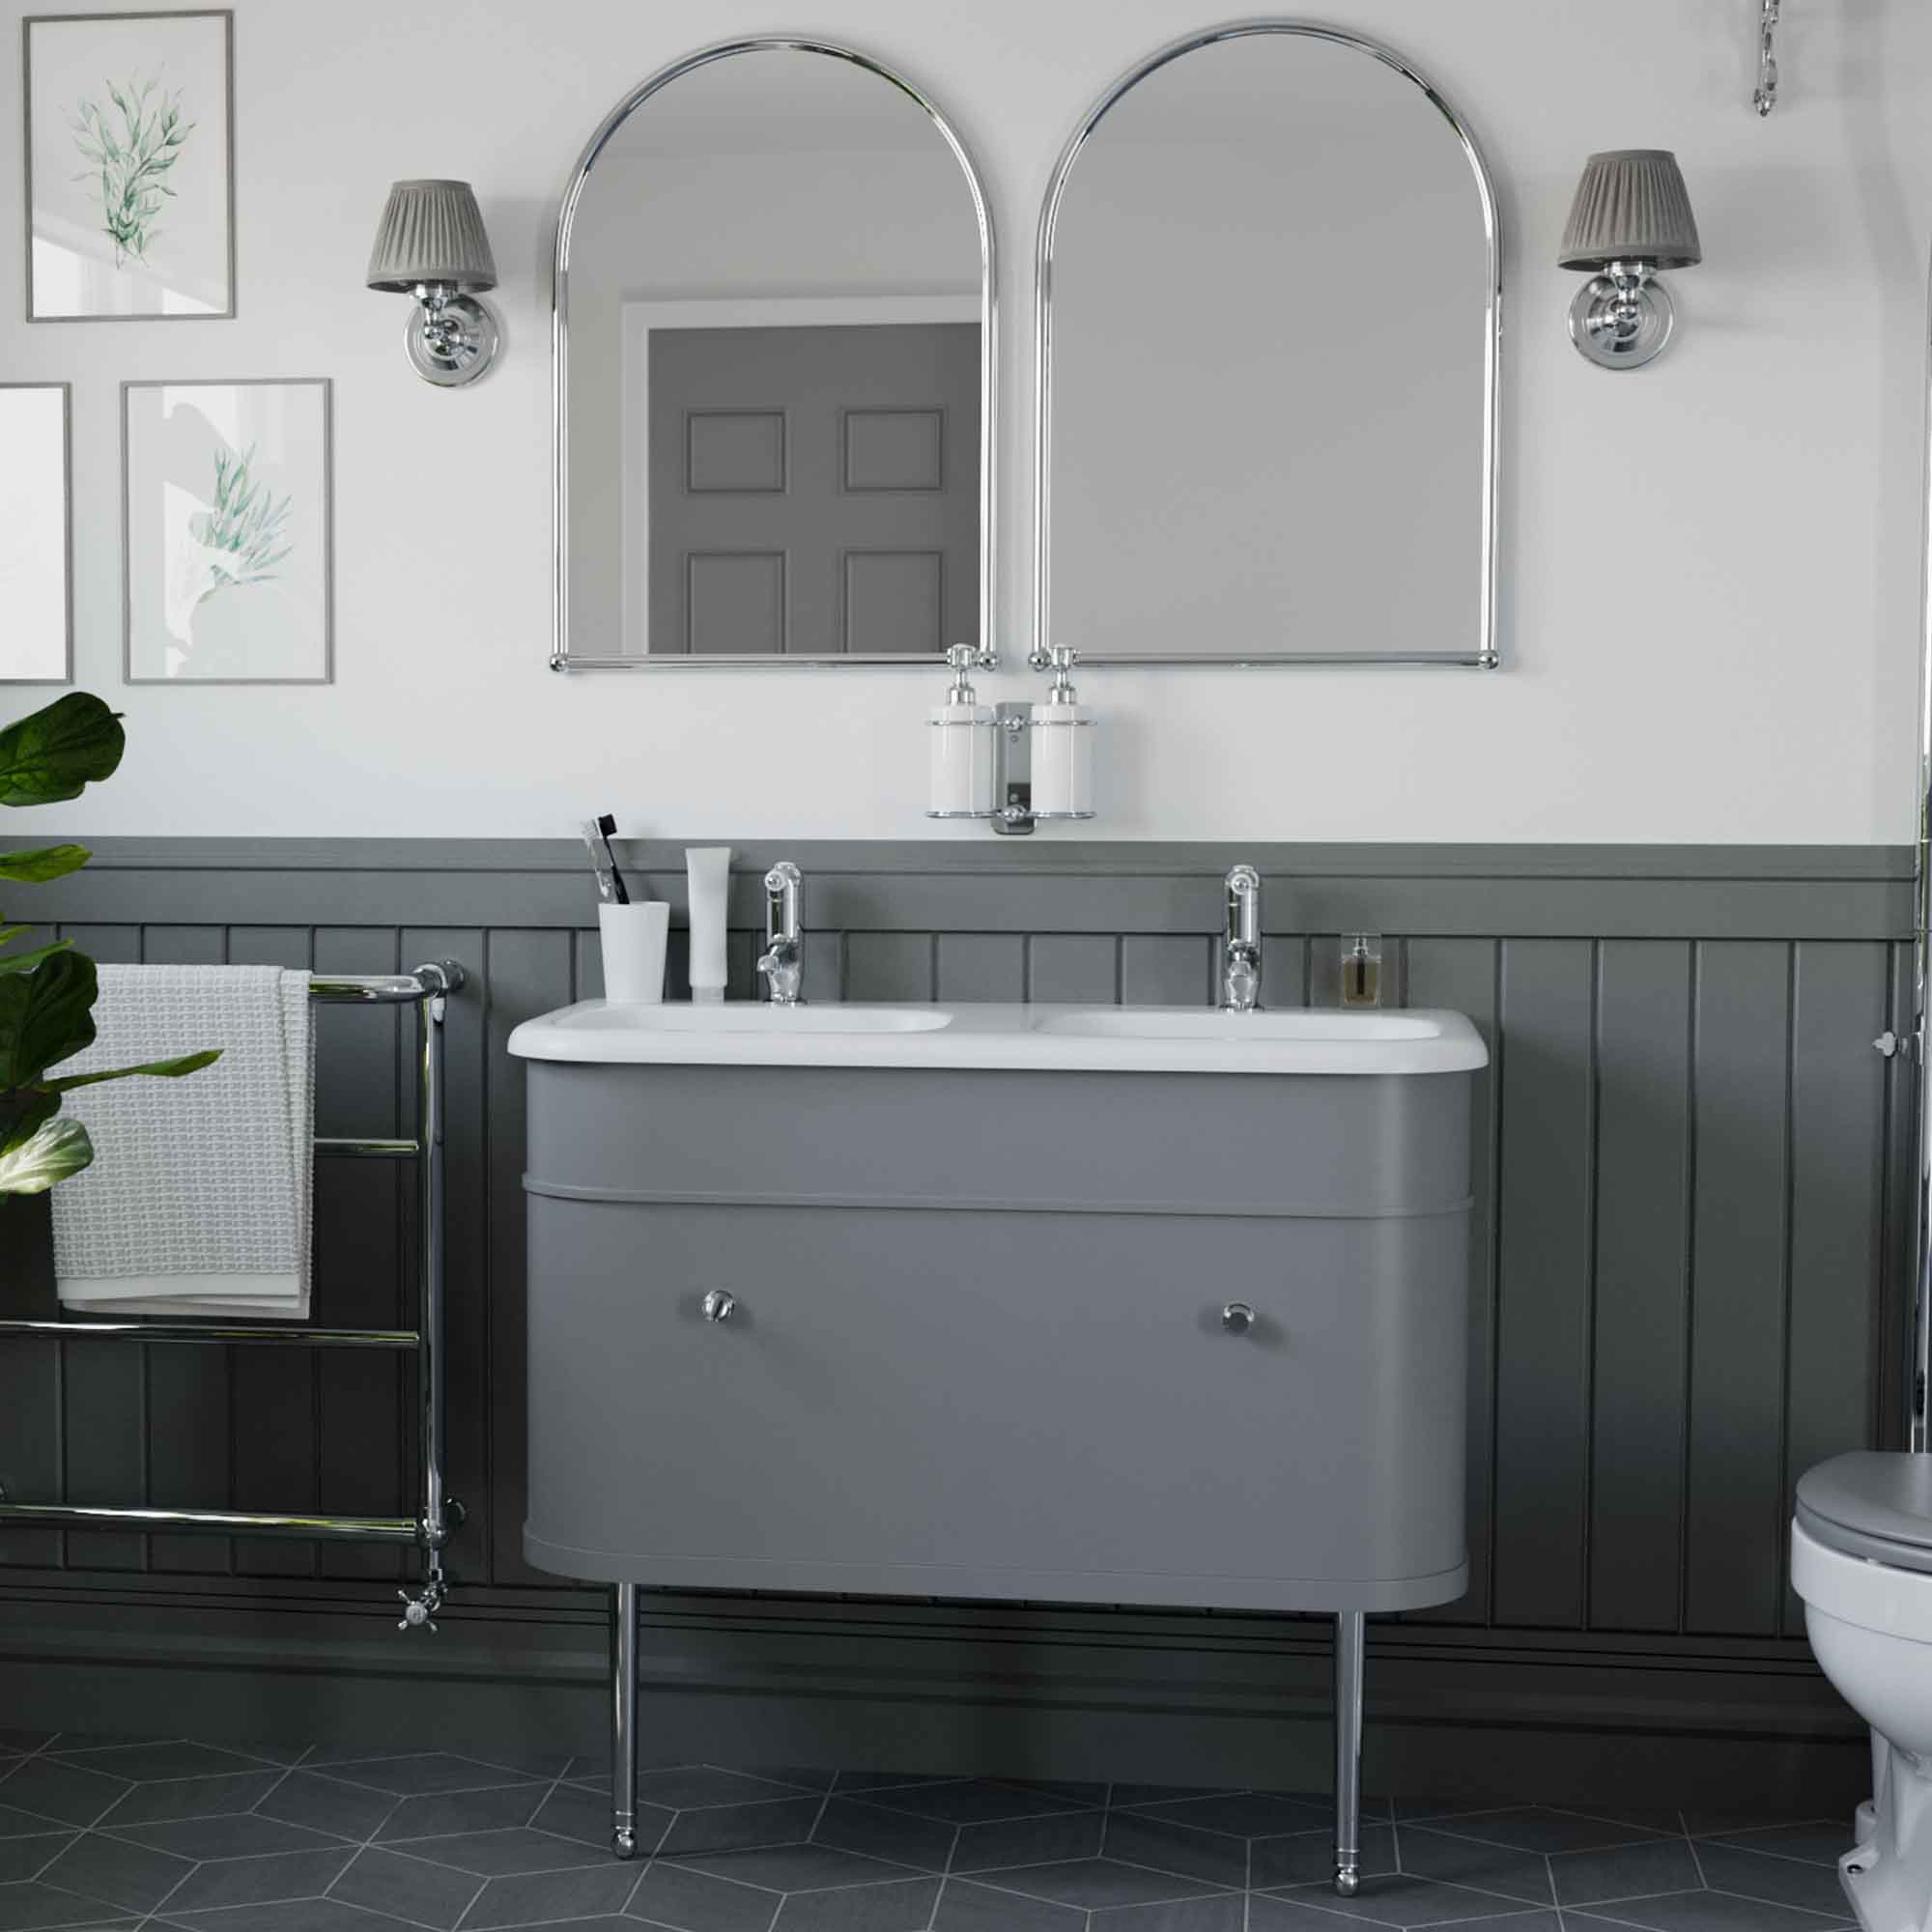 burlington chalfont 550mm wall mounted vanity with roll top basin classic grey